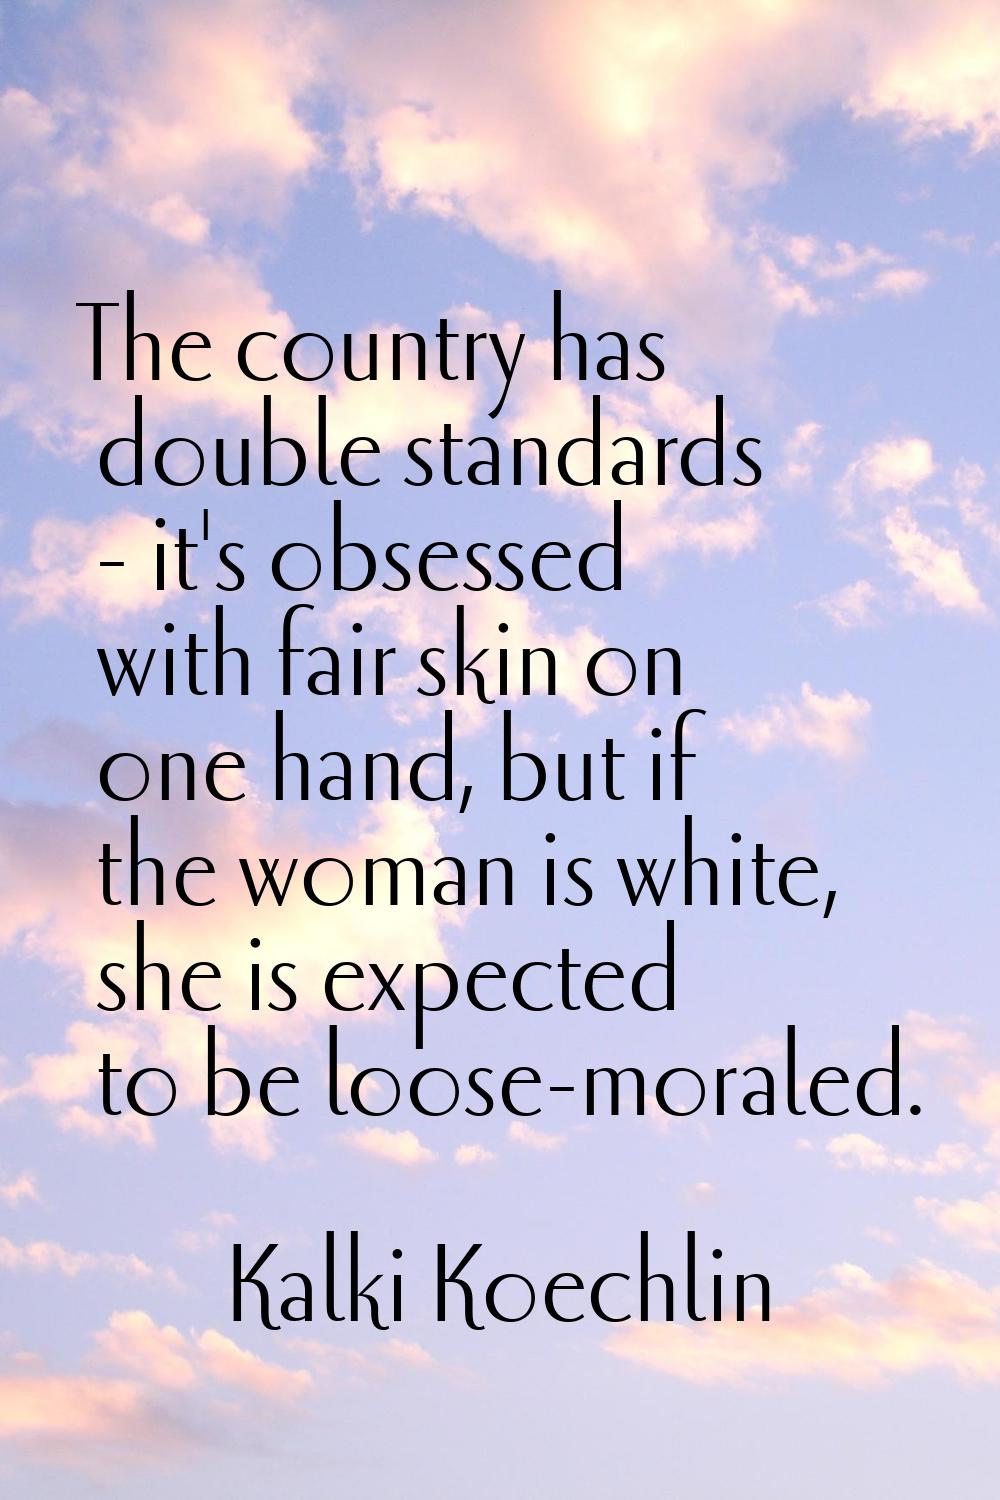 The country has double standards - it's obsessed with fair skin on one hand, but if the woman is wh